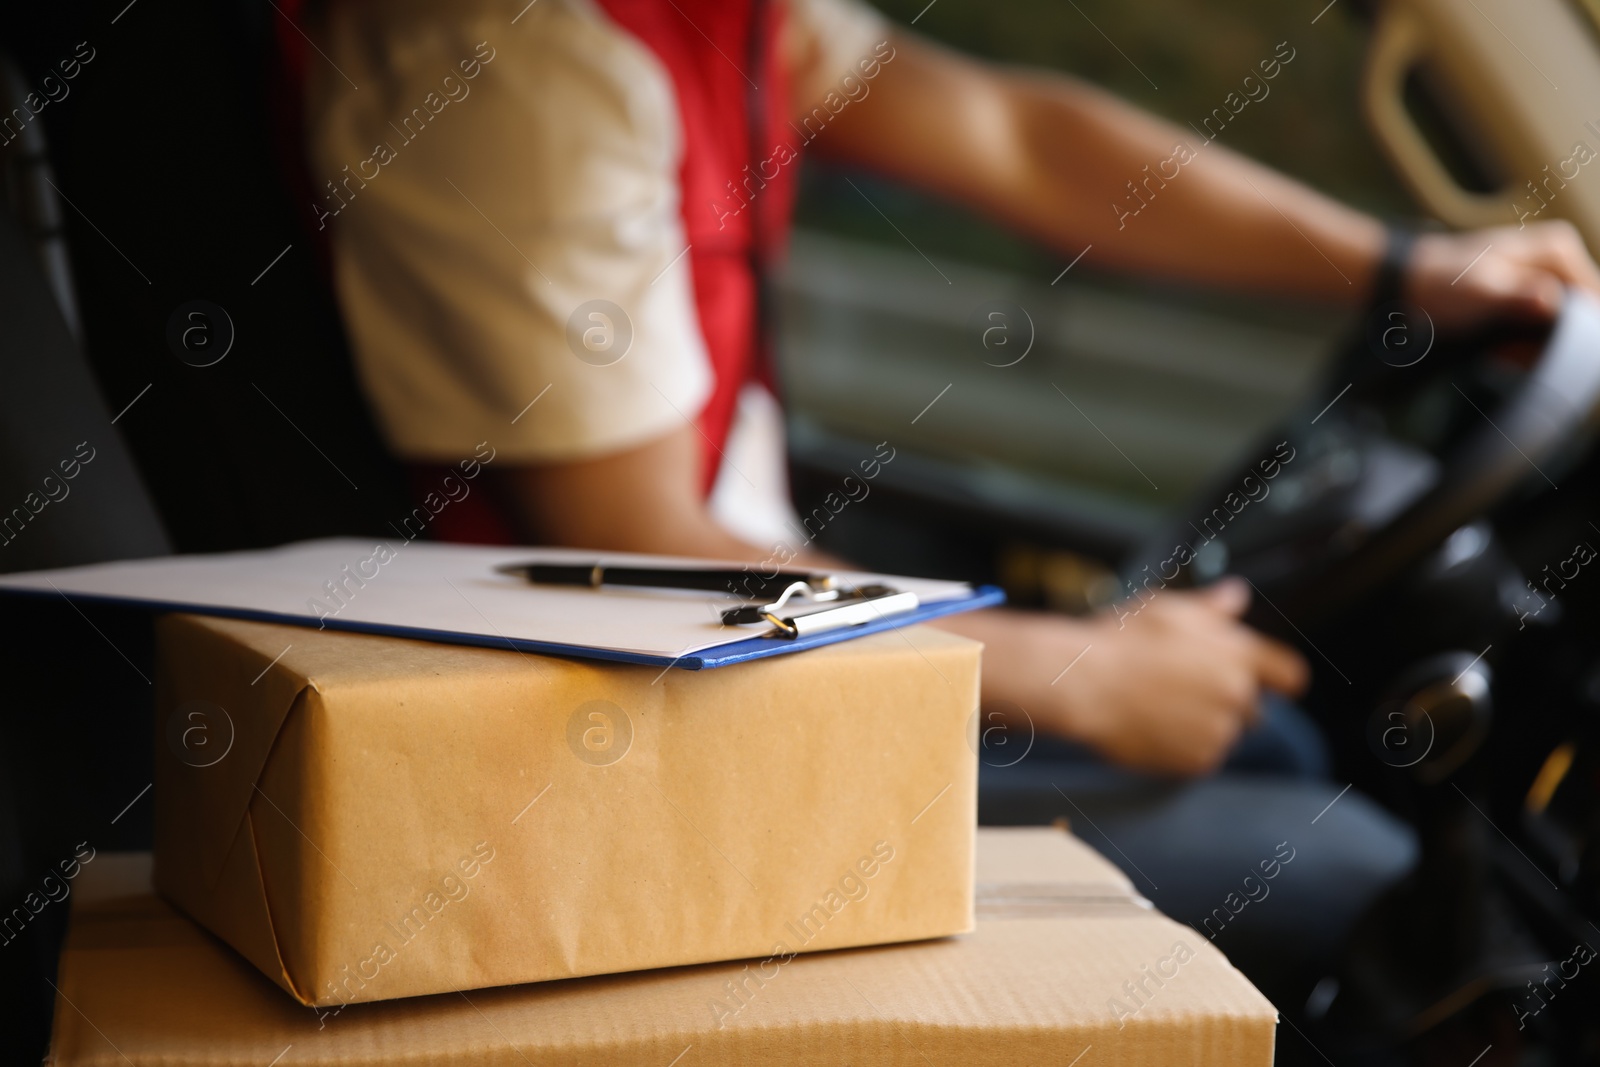 Photo of Courier driving delivery van, focus on parcels and clipboard